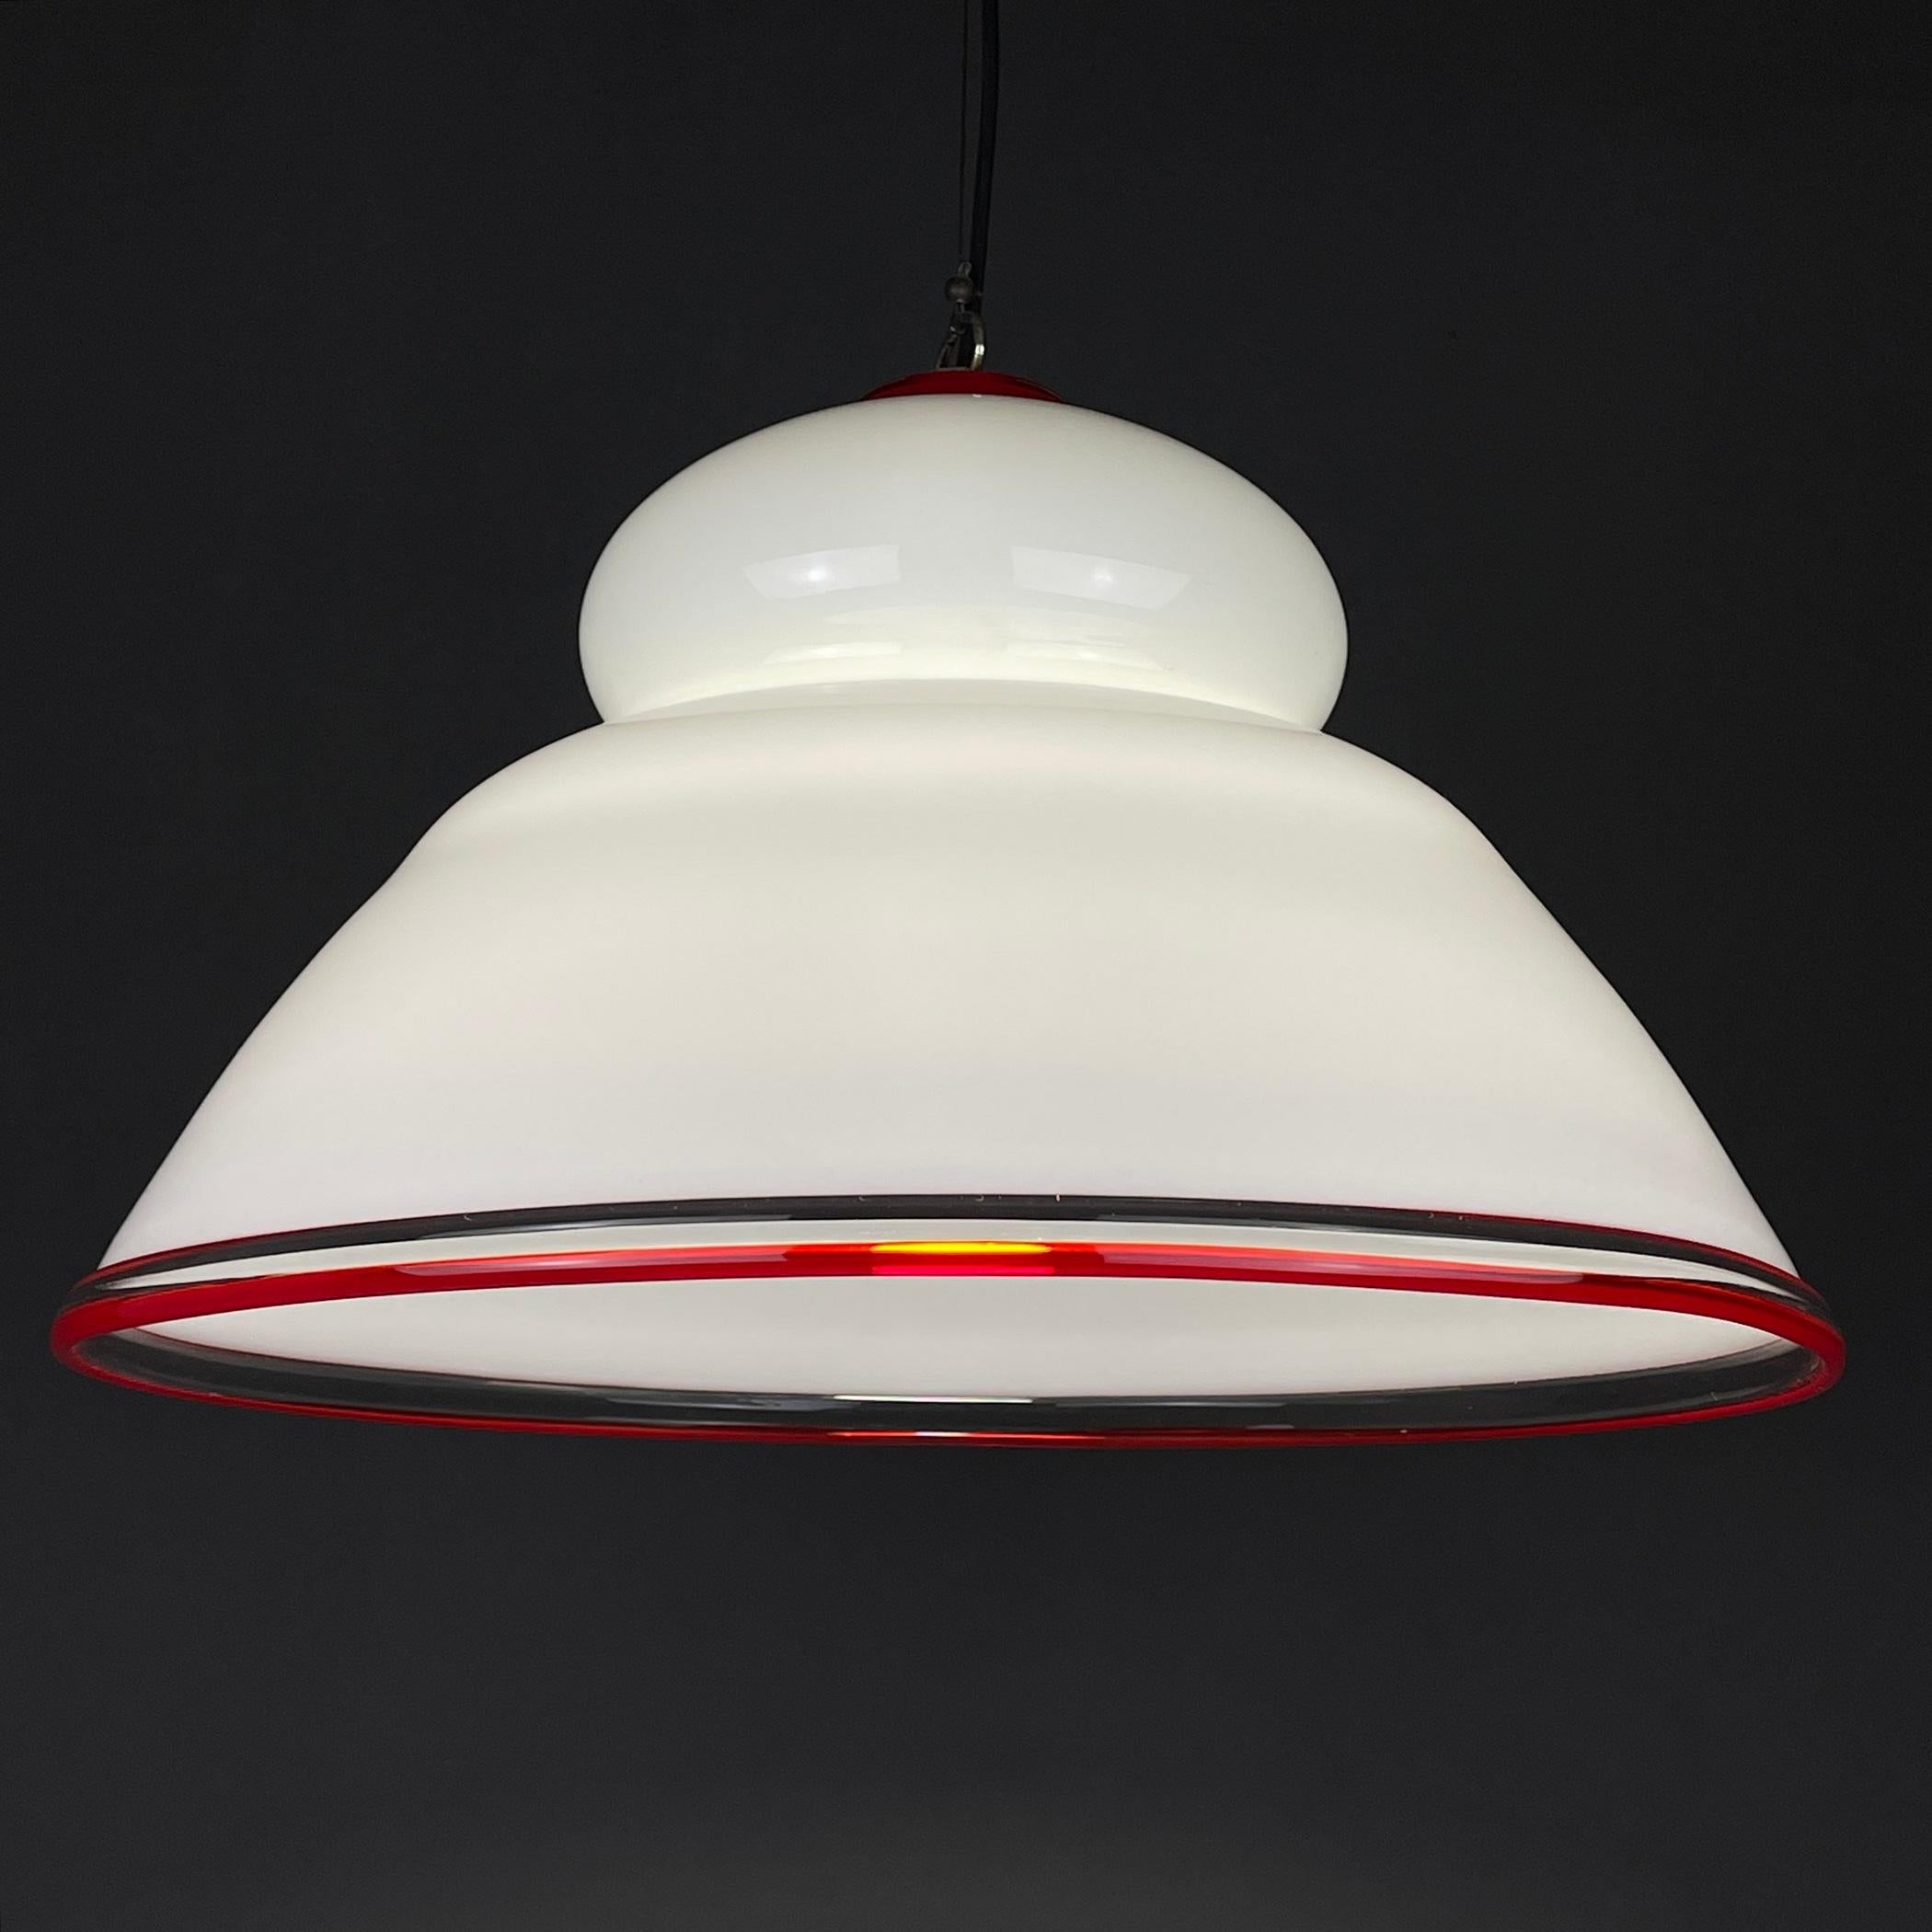 Italian 1970s midcentury white and red Murano glass pendant lamp.

This Murano glass chandelier is a famous example of Italian lighting from the 1970s. It is fashionable and elegant.
Italian made.

Amazing vintage condition.
No cracks or